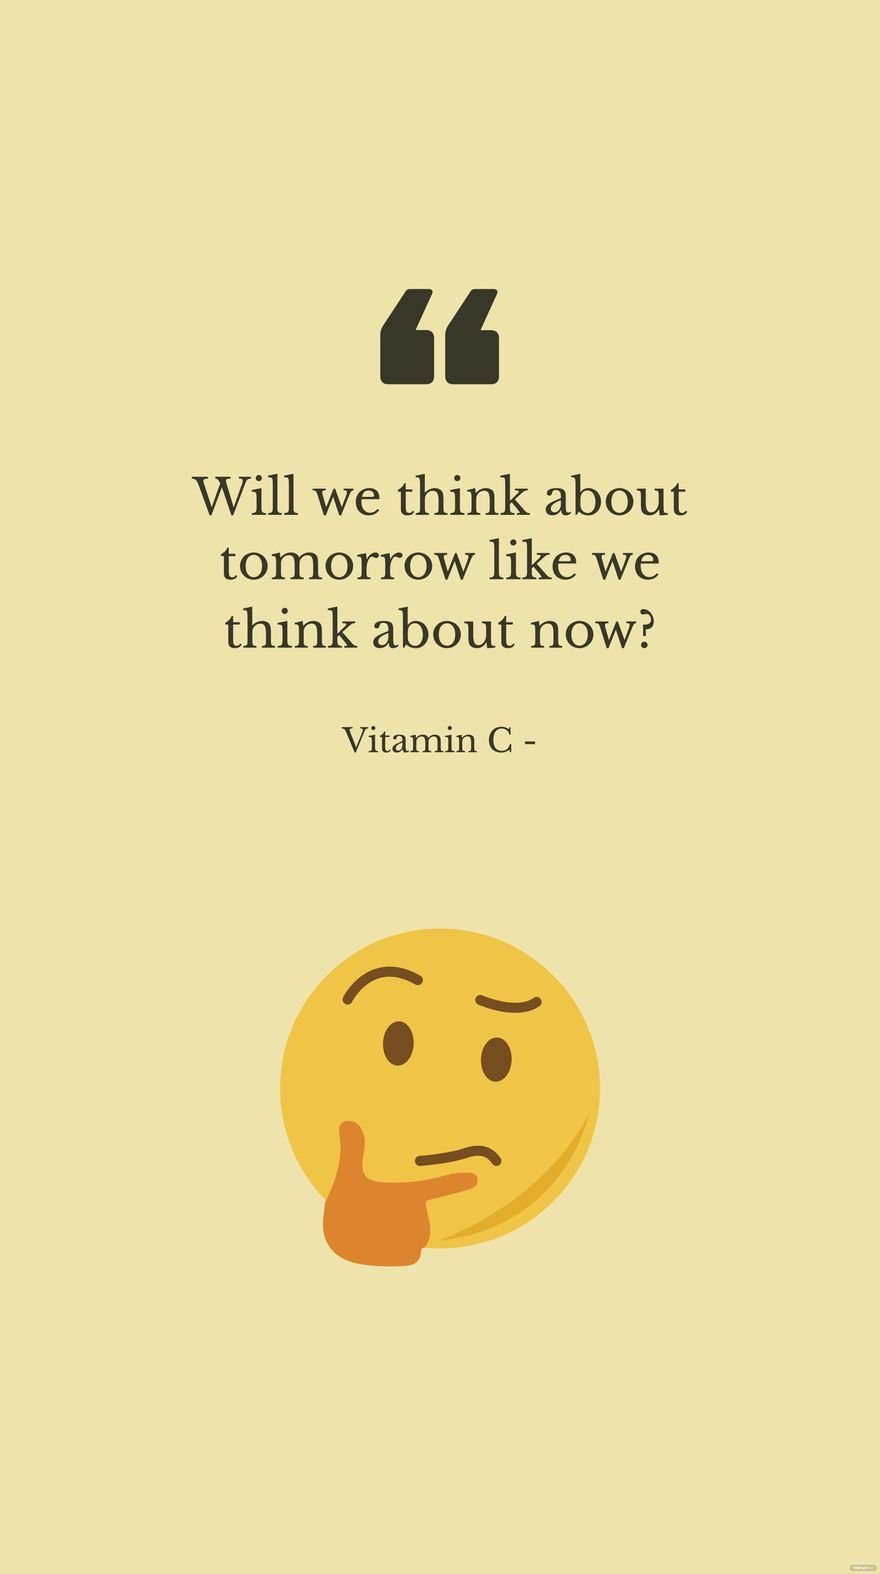 Vitamin C - Will we think about tomorrow like we think about now?